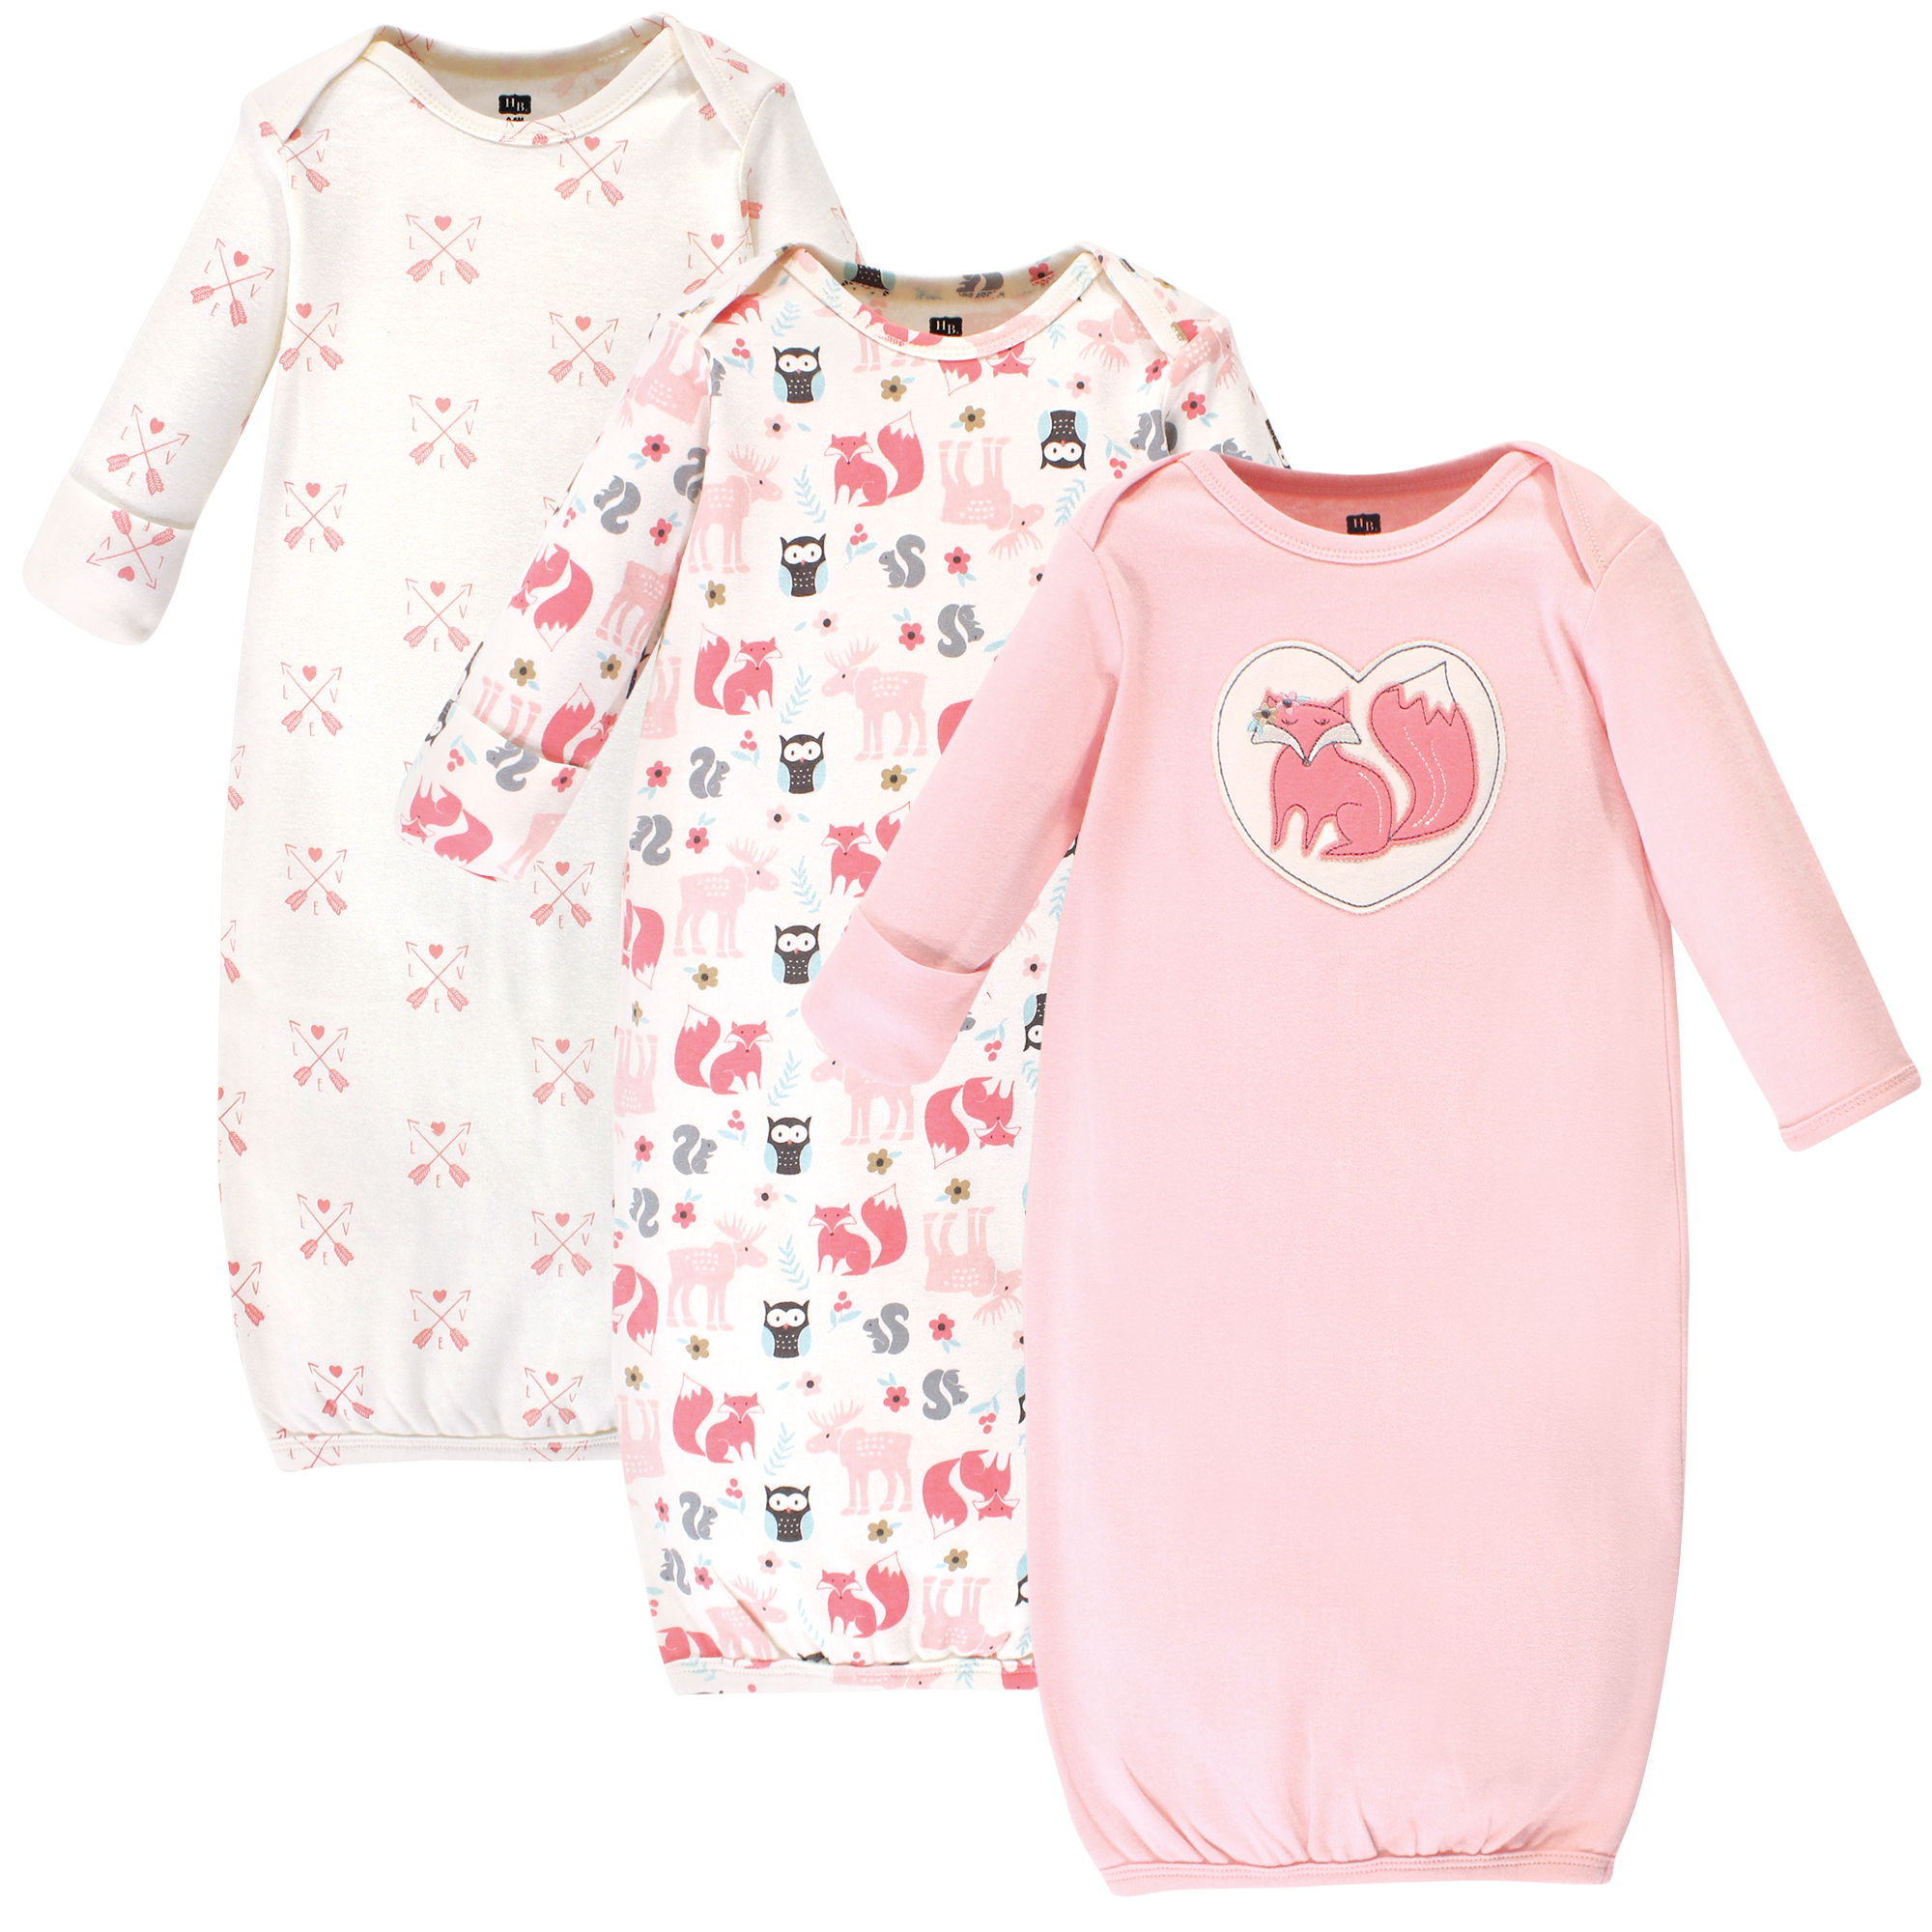 Hudson baby Unisex-Baby Cotton Gowns 